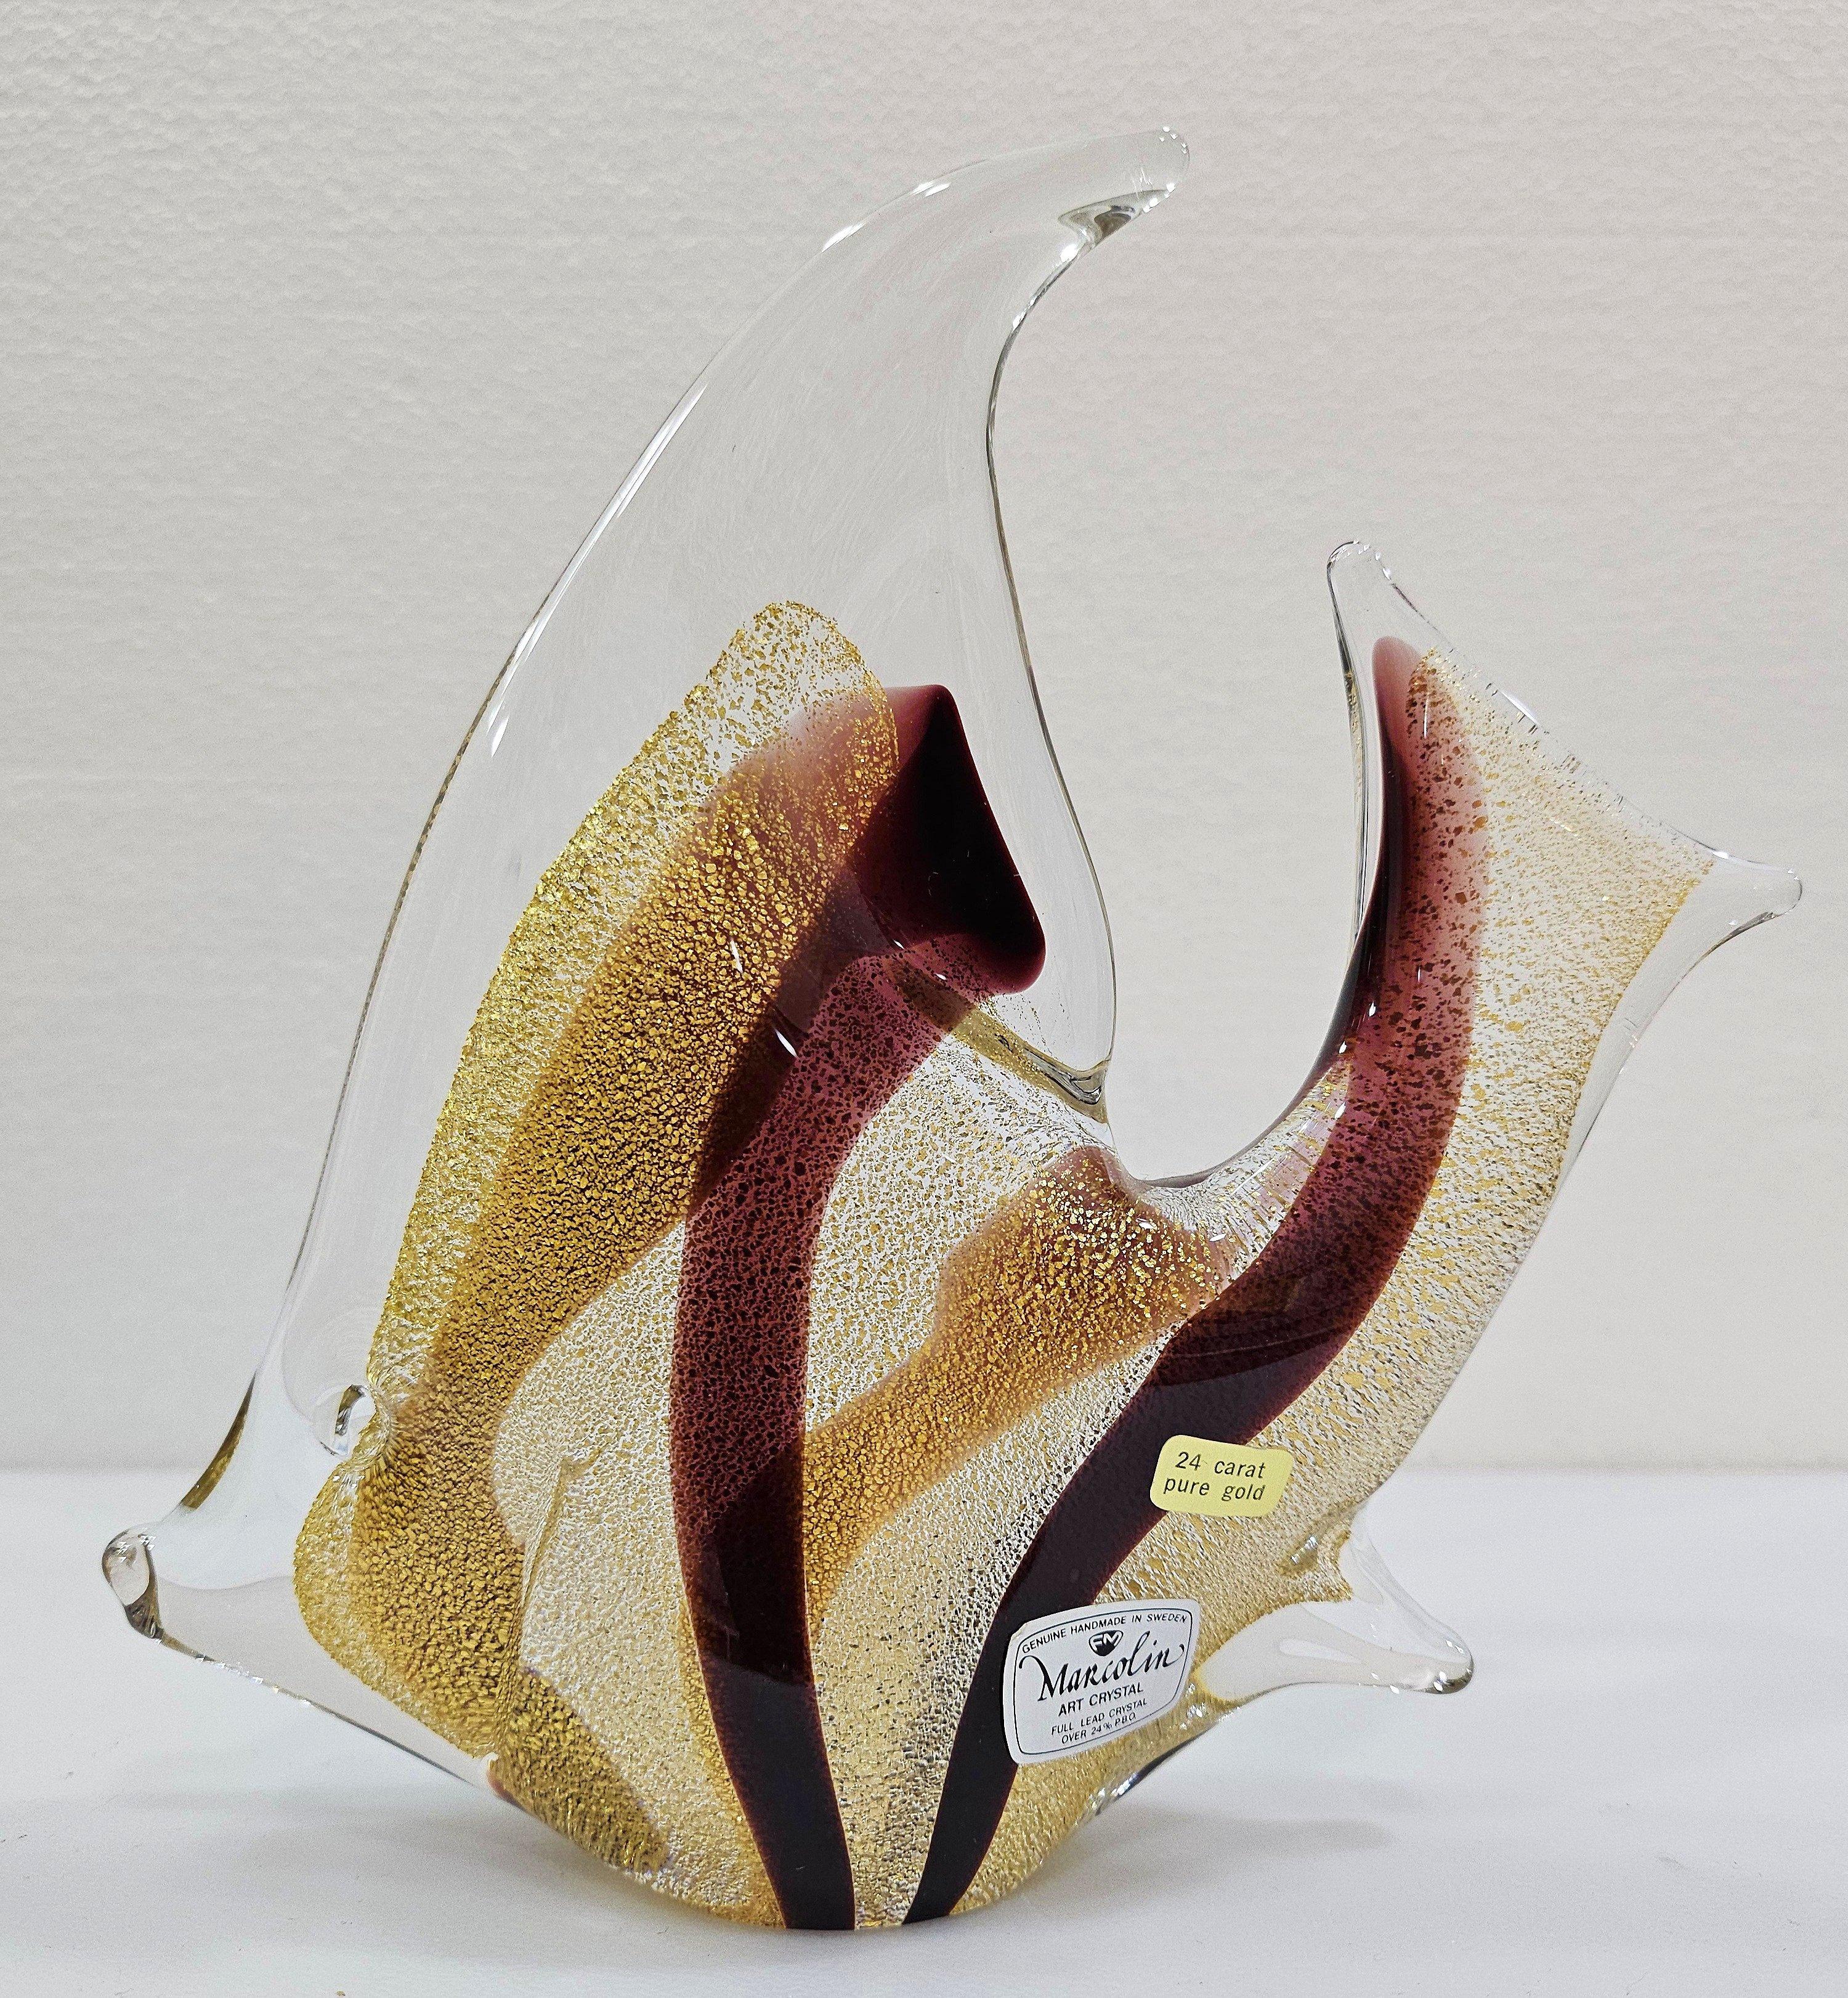 Swedish Signed, 24k gold infused, Glass Fish Sculpture by Josef Marcolin, original label For Sale